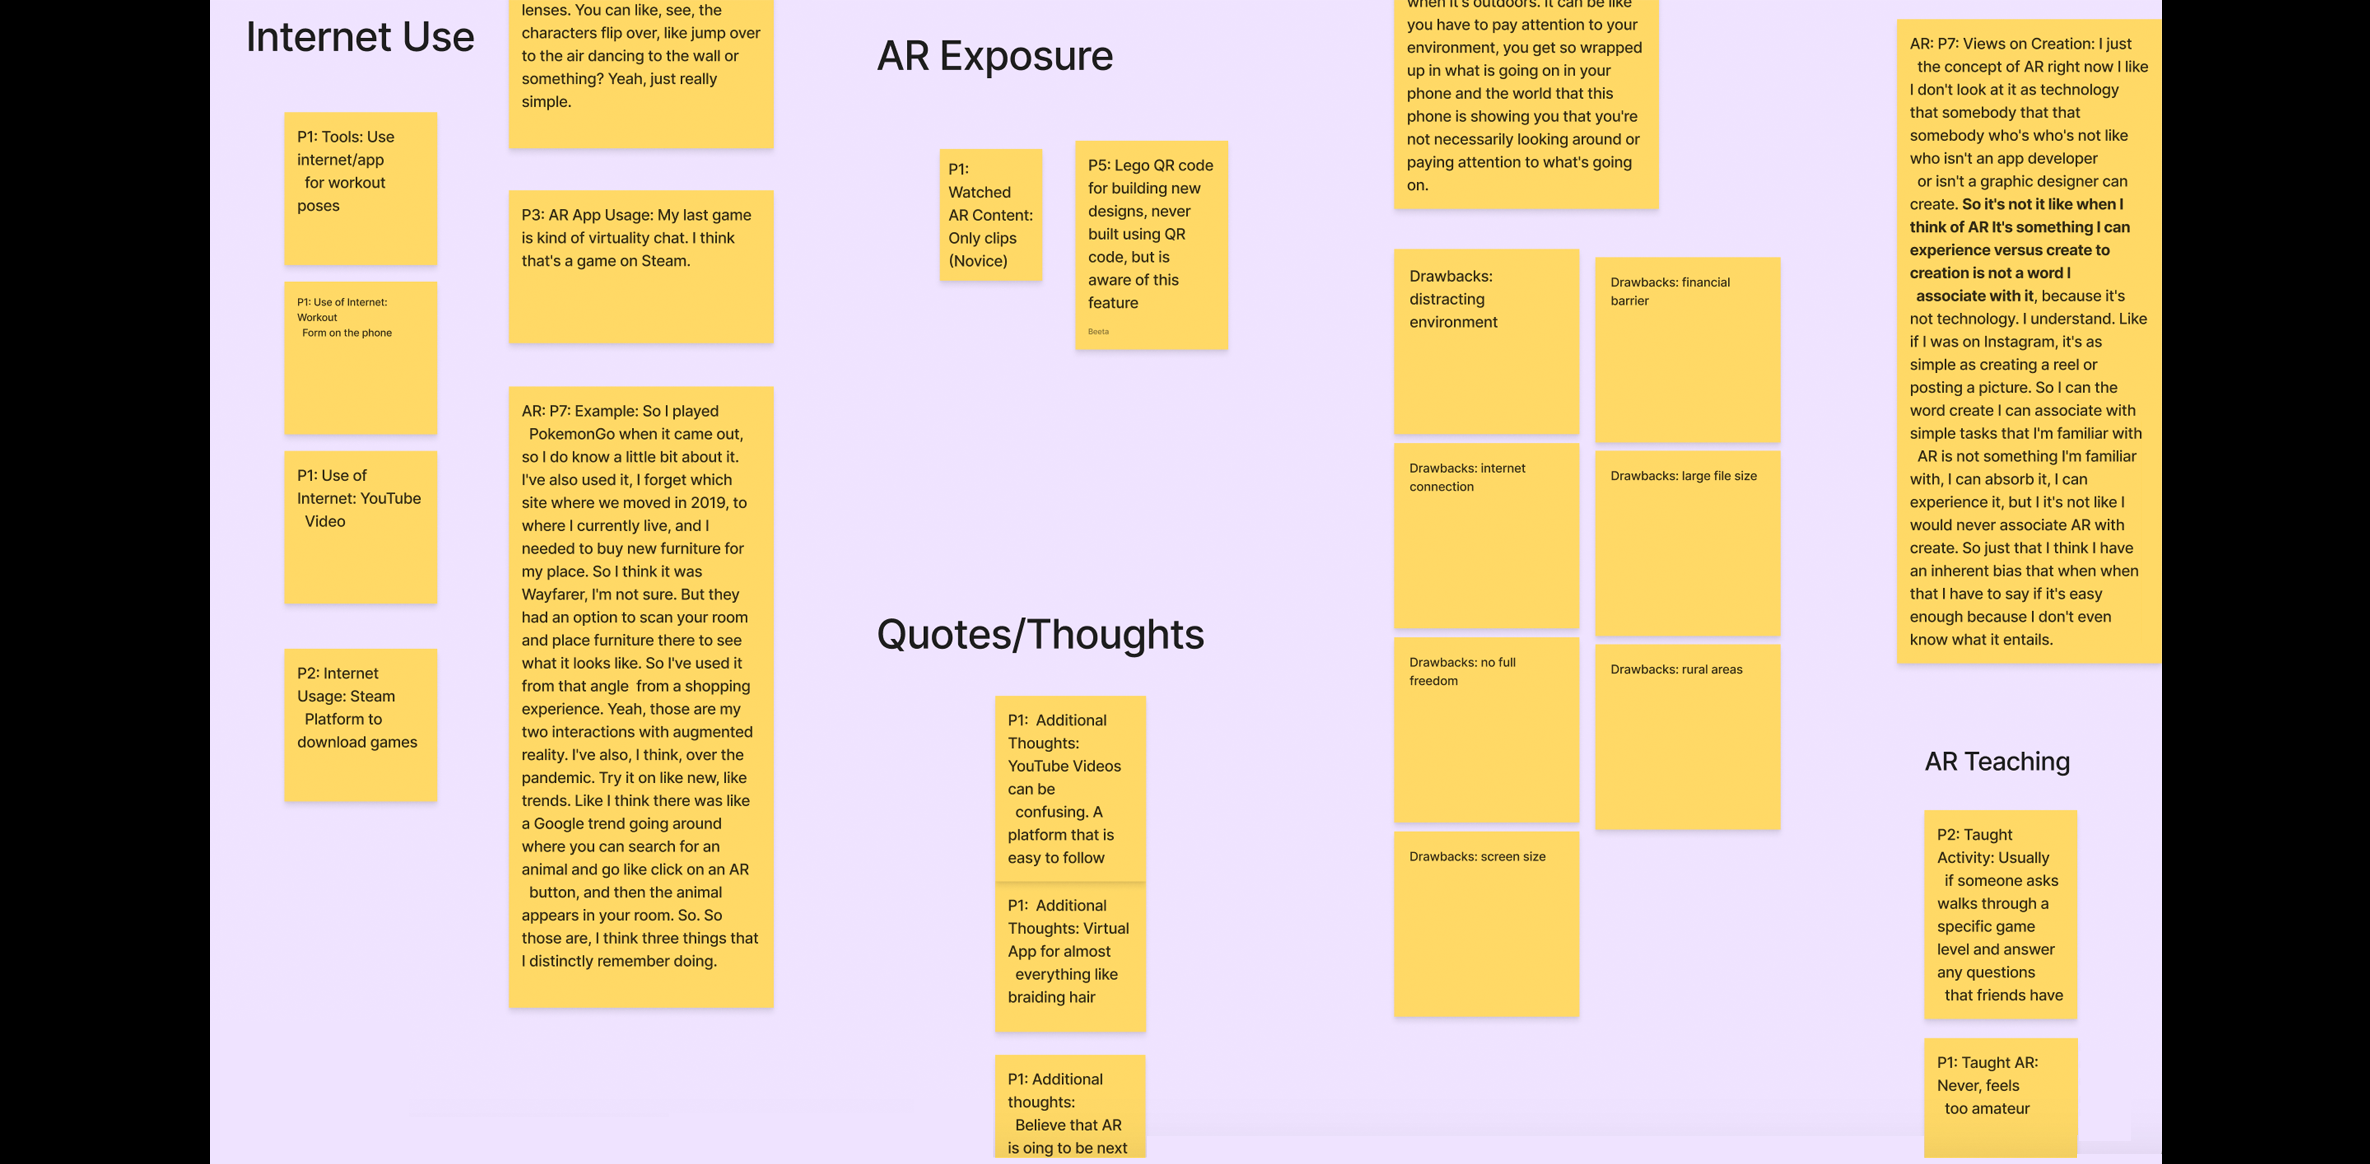 Novice Affinity Diagram for AR Explosure, Quotes/Thoughts, and Internet Use categories.